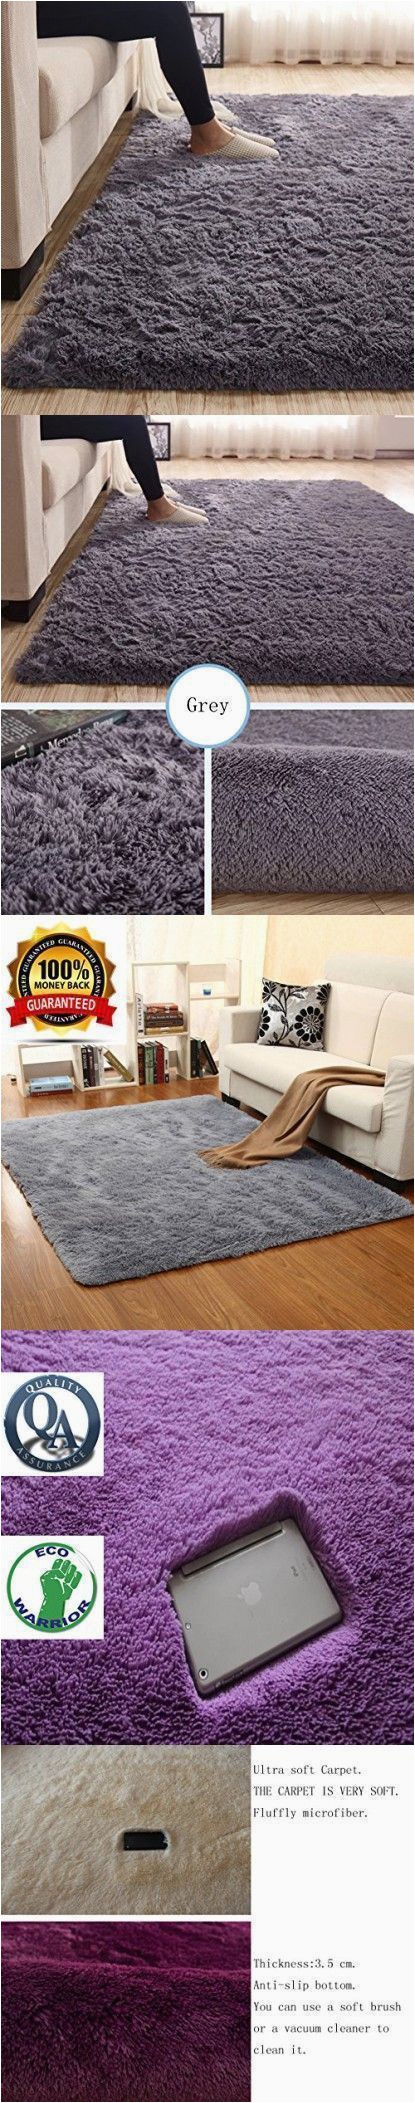 Large Non Slip area Rugs Maxyoyo 3 5 Cm Height solid Color Fluffy Shaggy area